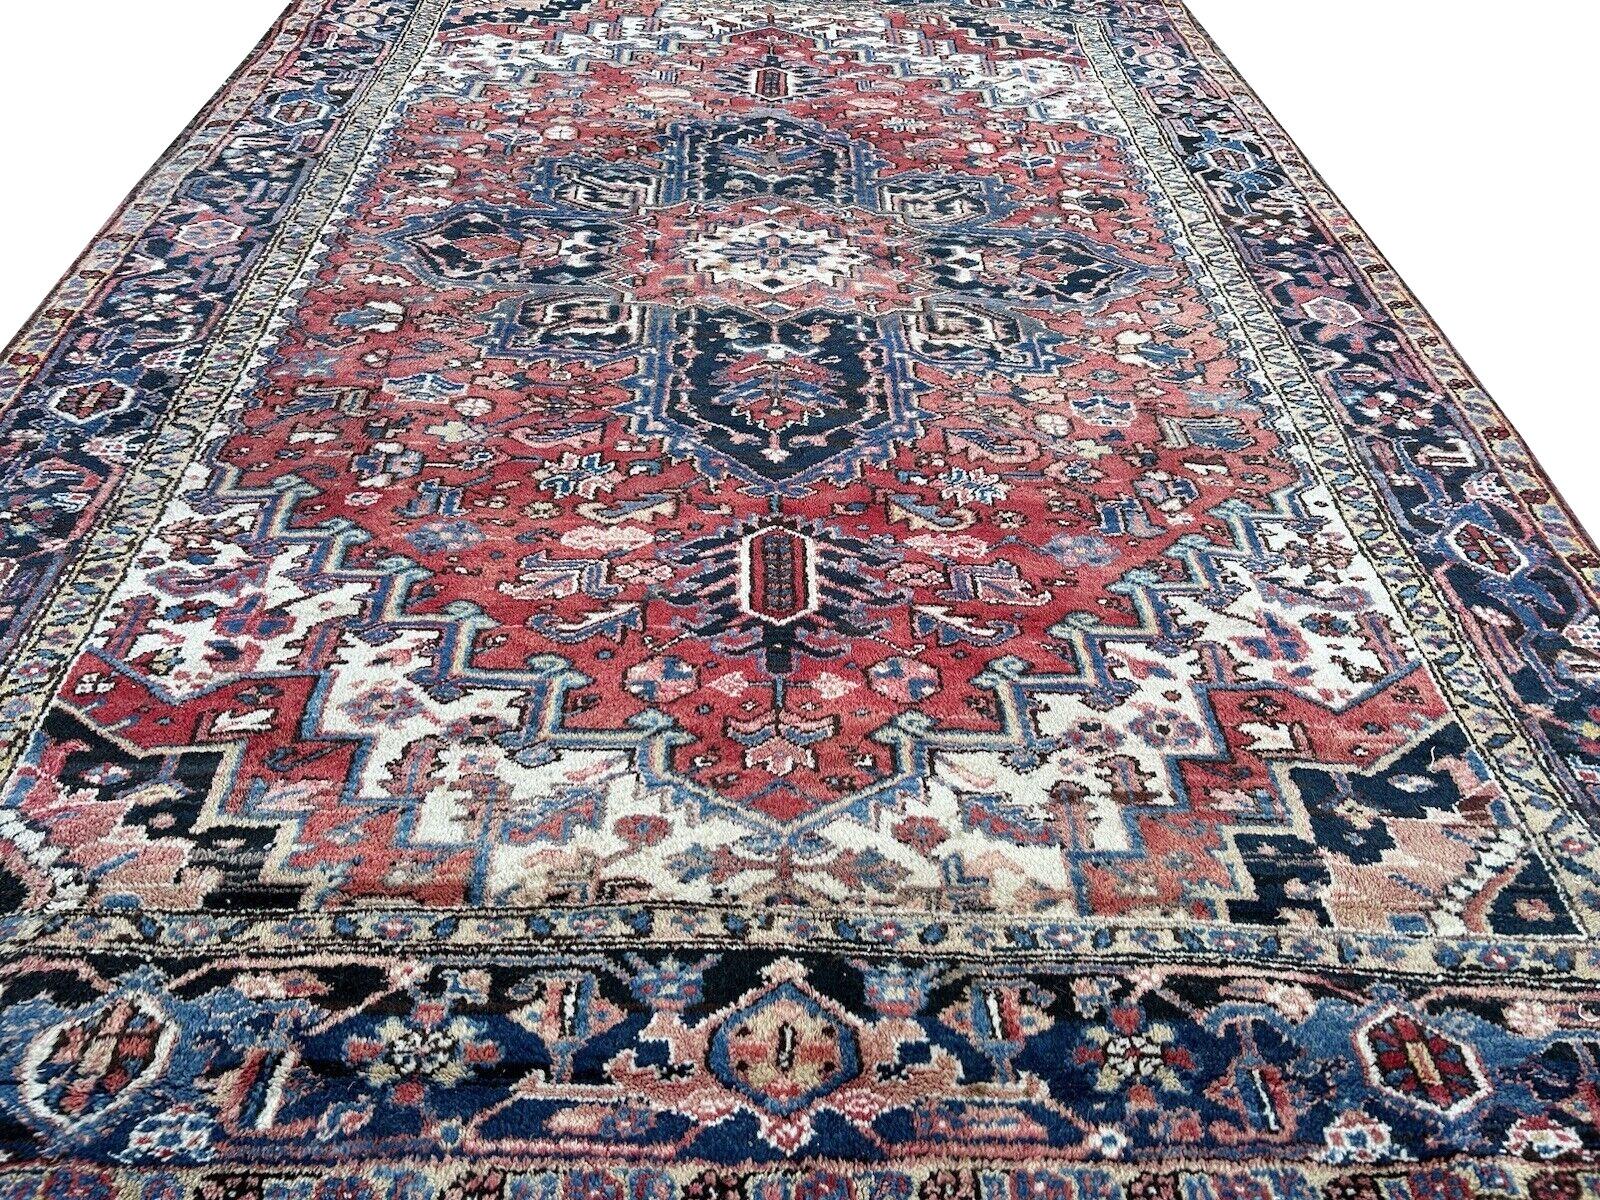 Azeri Heriz Serapi Semi Antique Rug approx. 340 x 230 cm - 7.6 x 11 ft carpet room size.
• Beautiful large vintage rug
• All hand made, hand knotted
• Pile pure wool, warp and weft cotton
• Traditional design, very unique rug
• Condition: Very good